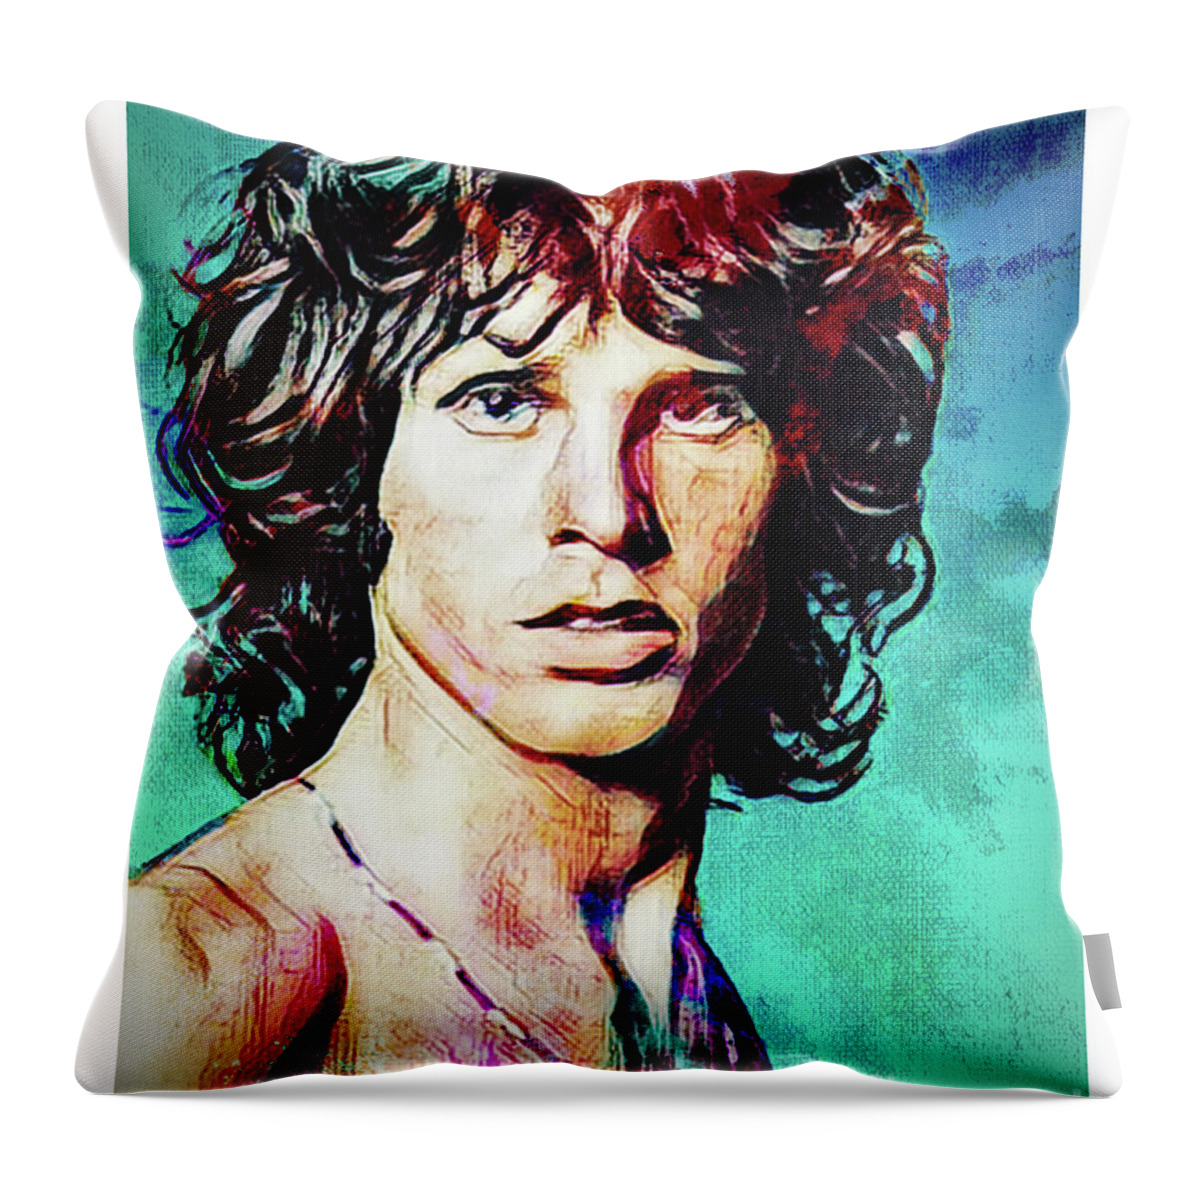 Rock Star Art Print Throw Pillow featuring the digital art Jim The Rock Star Psychedelia by Franchi Torres